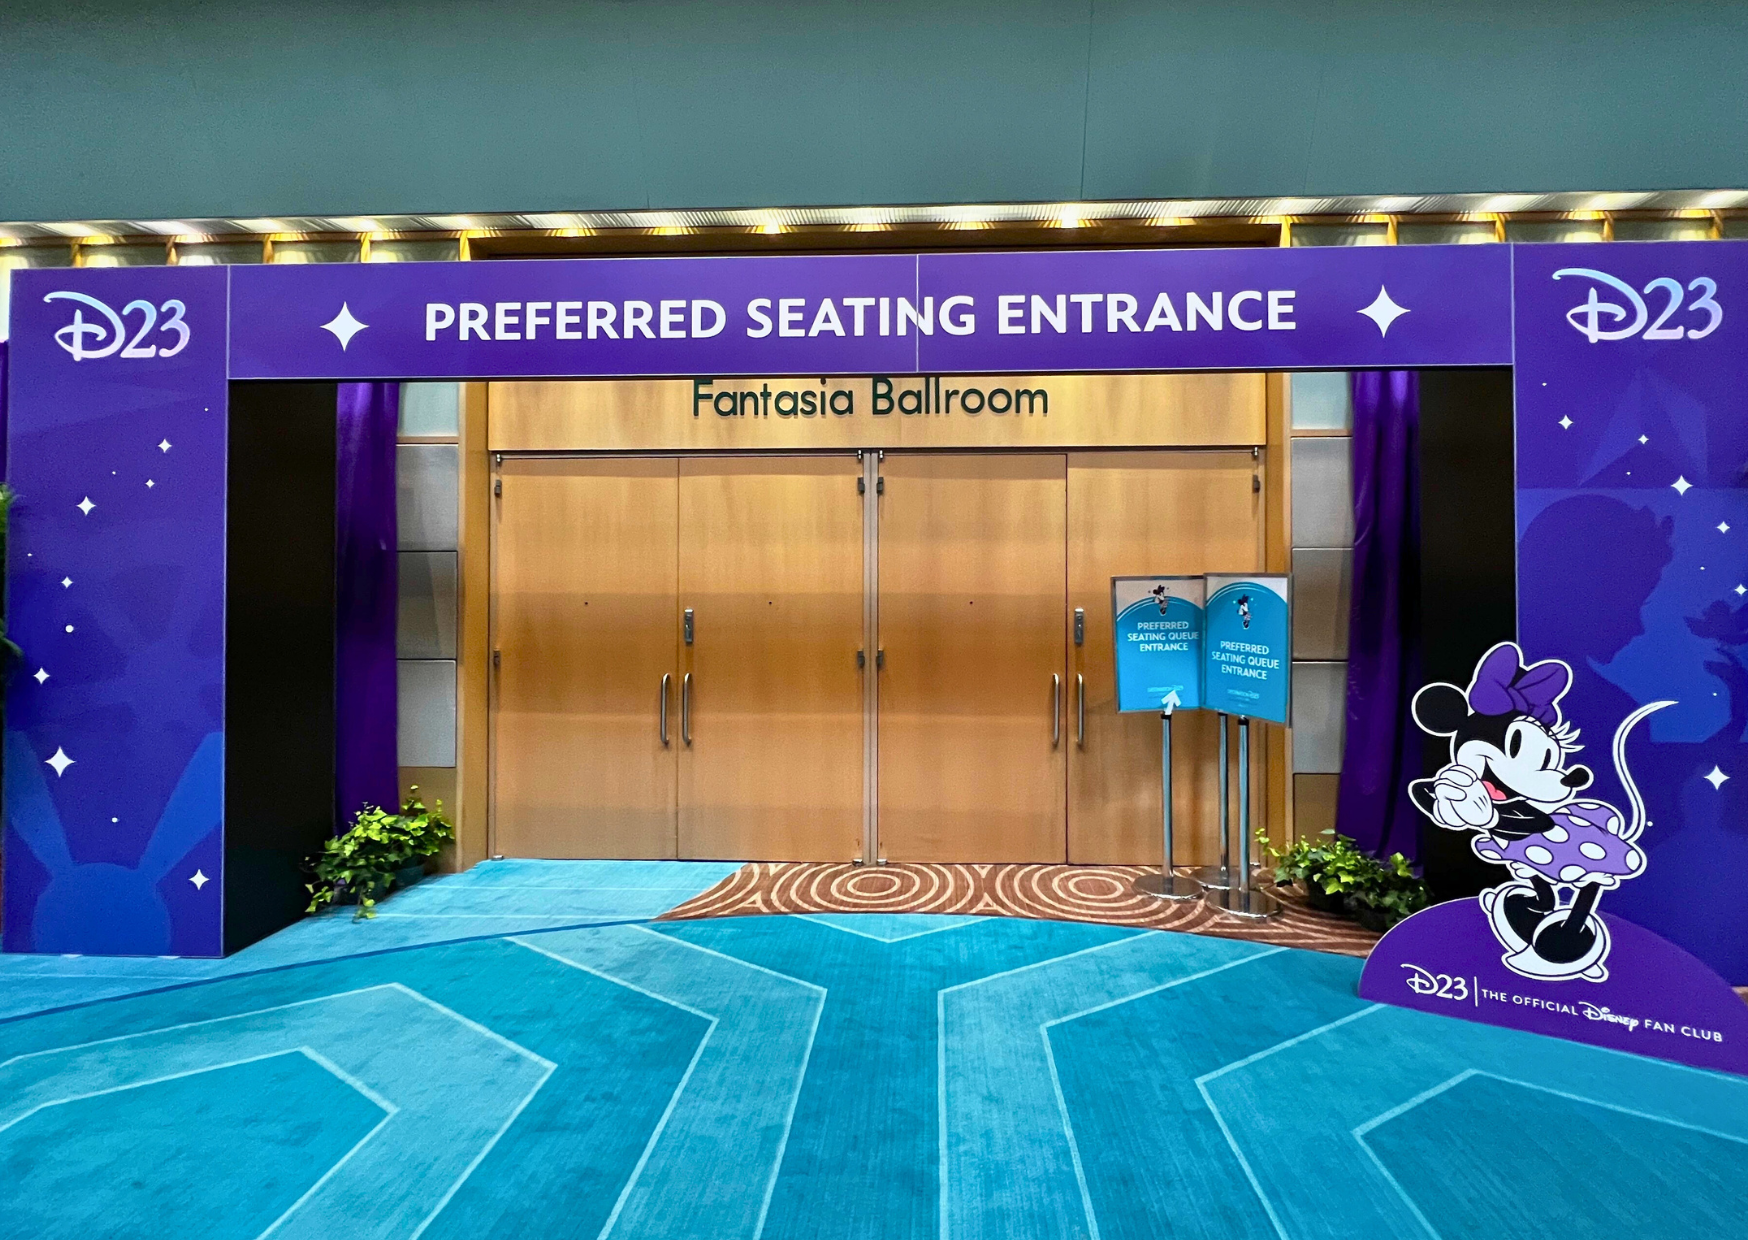 Preferred seating entrance